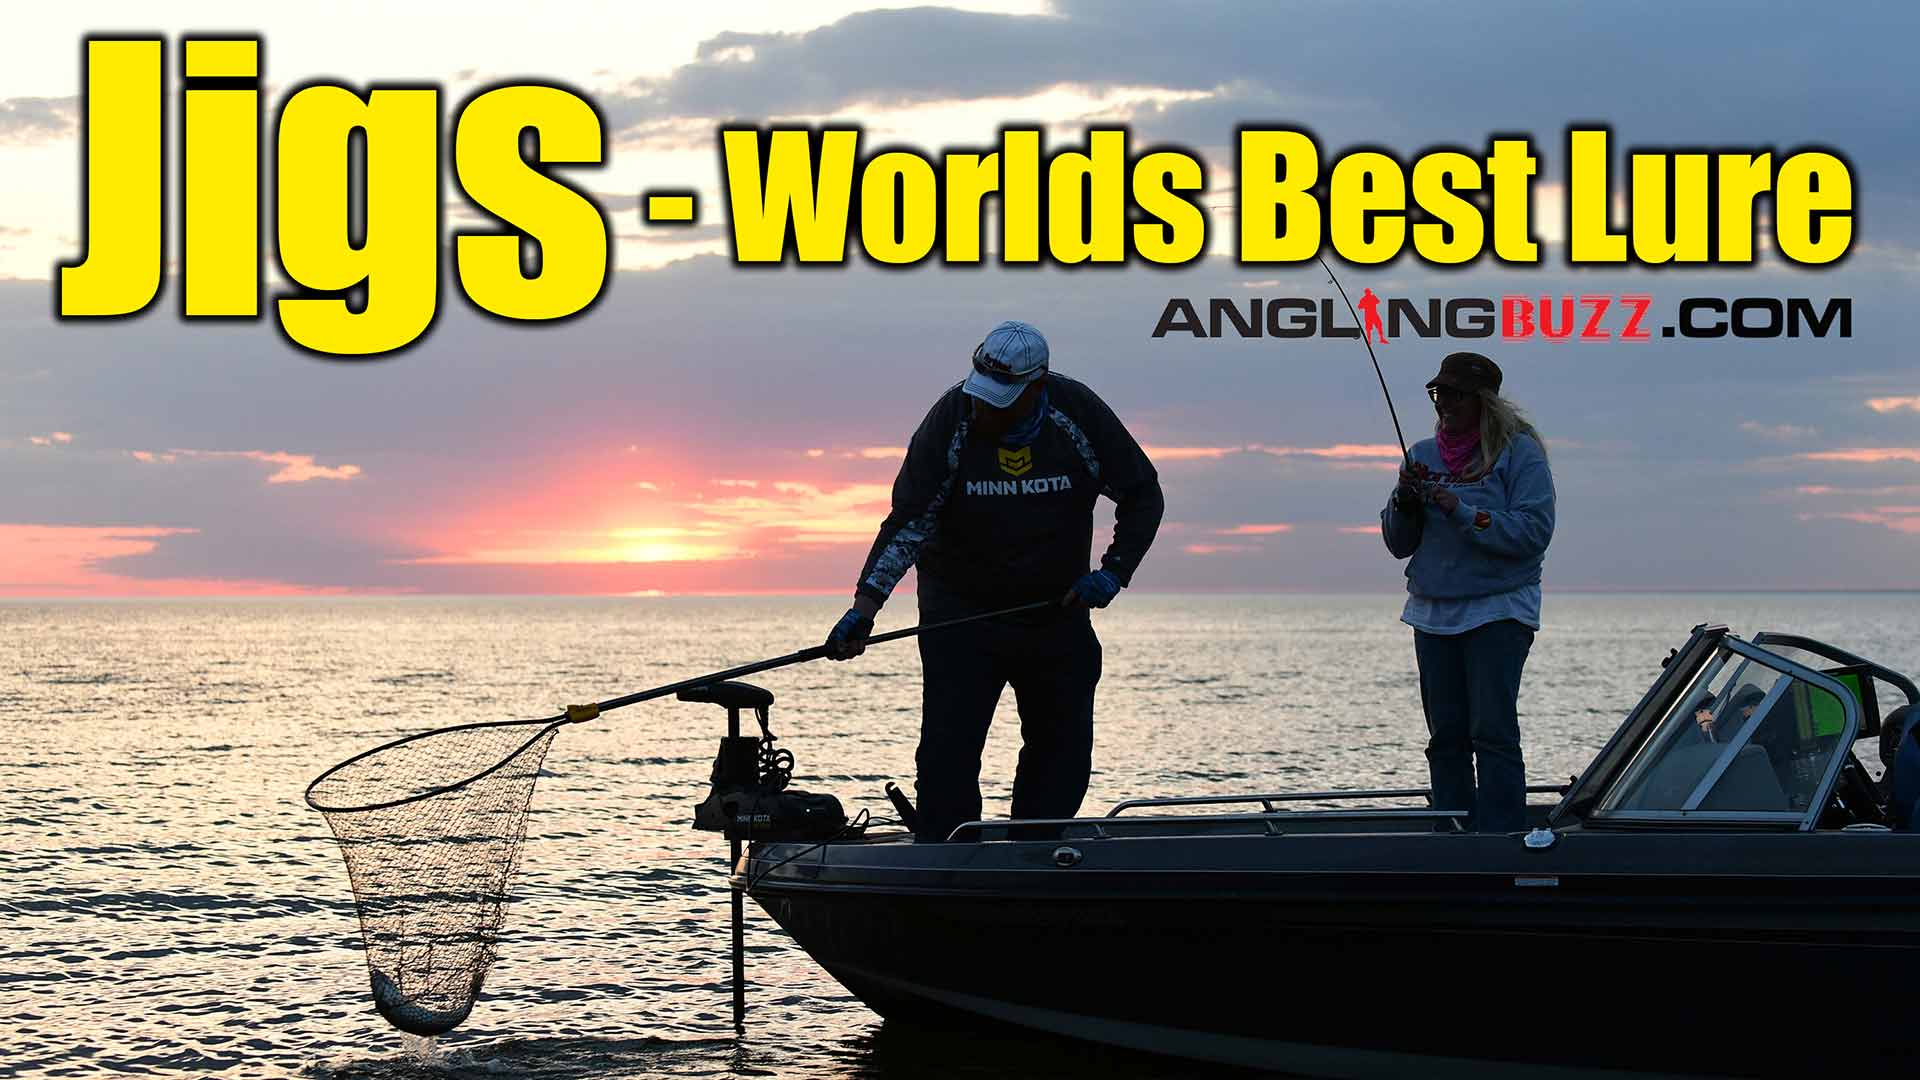 AnglingBuzz Show 4: Worlds Best Fishing Lure: Jigs AnglingBuzz